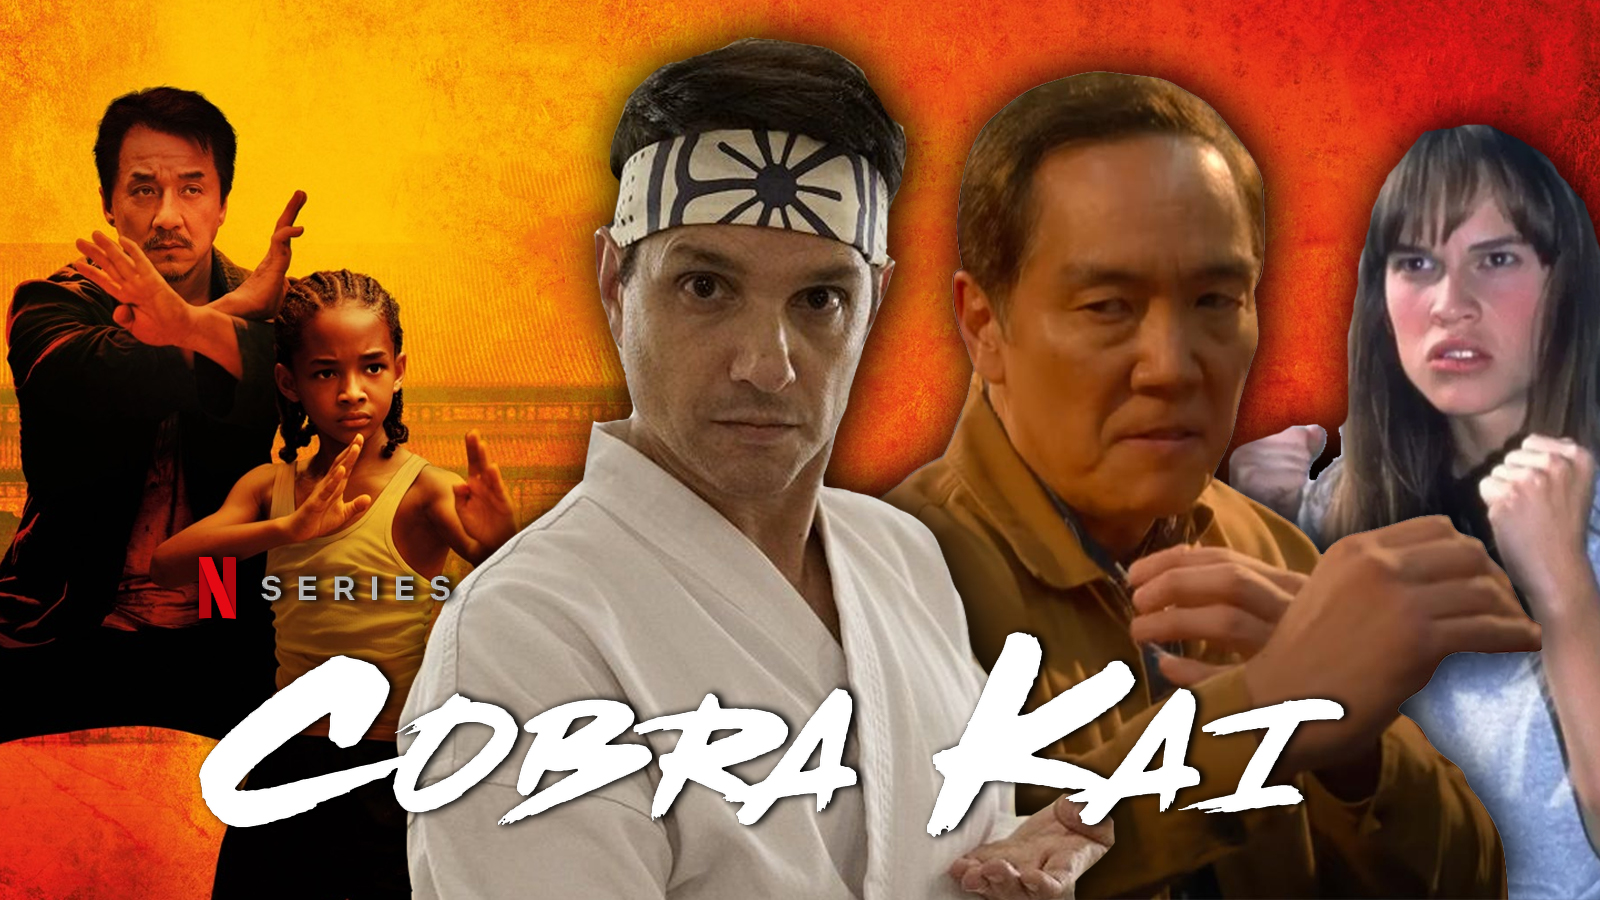 The Karate Kid 2024' Release Date, Cast, Plot, and More